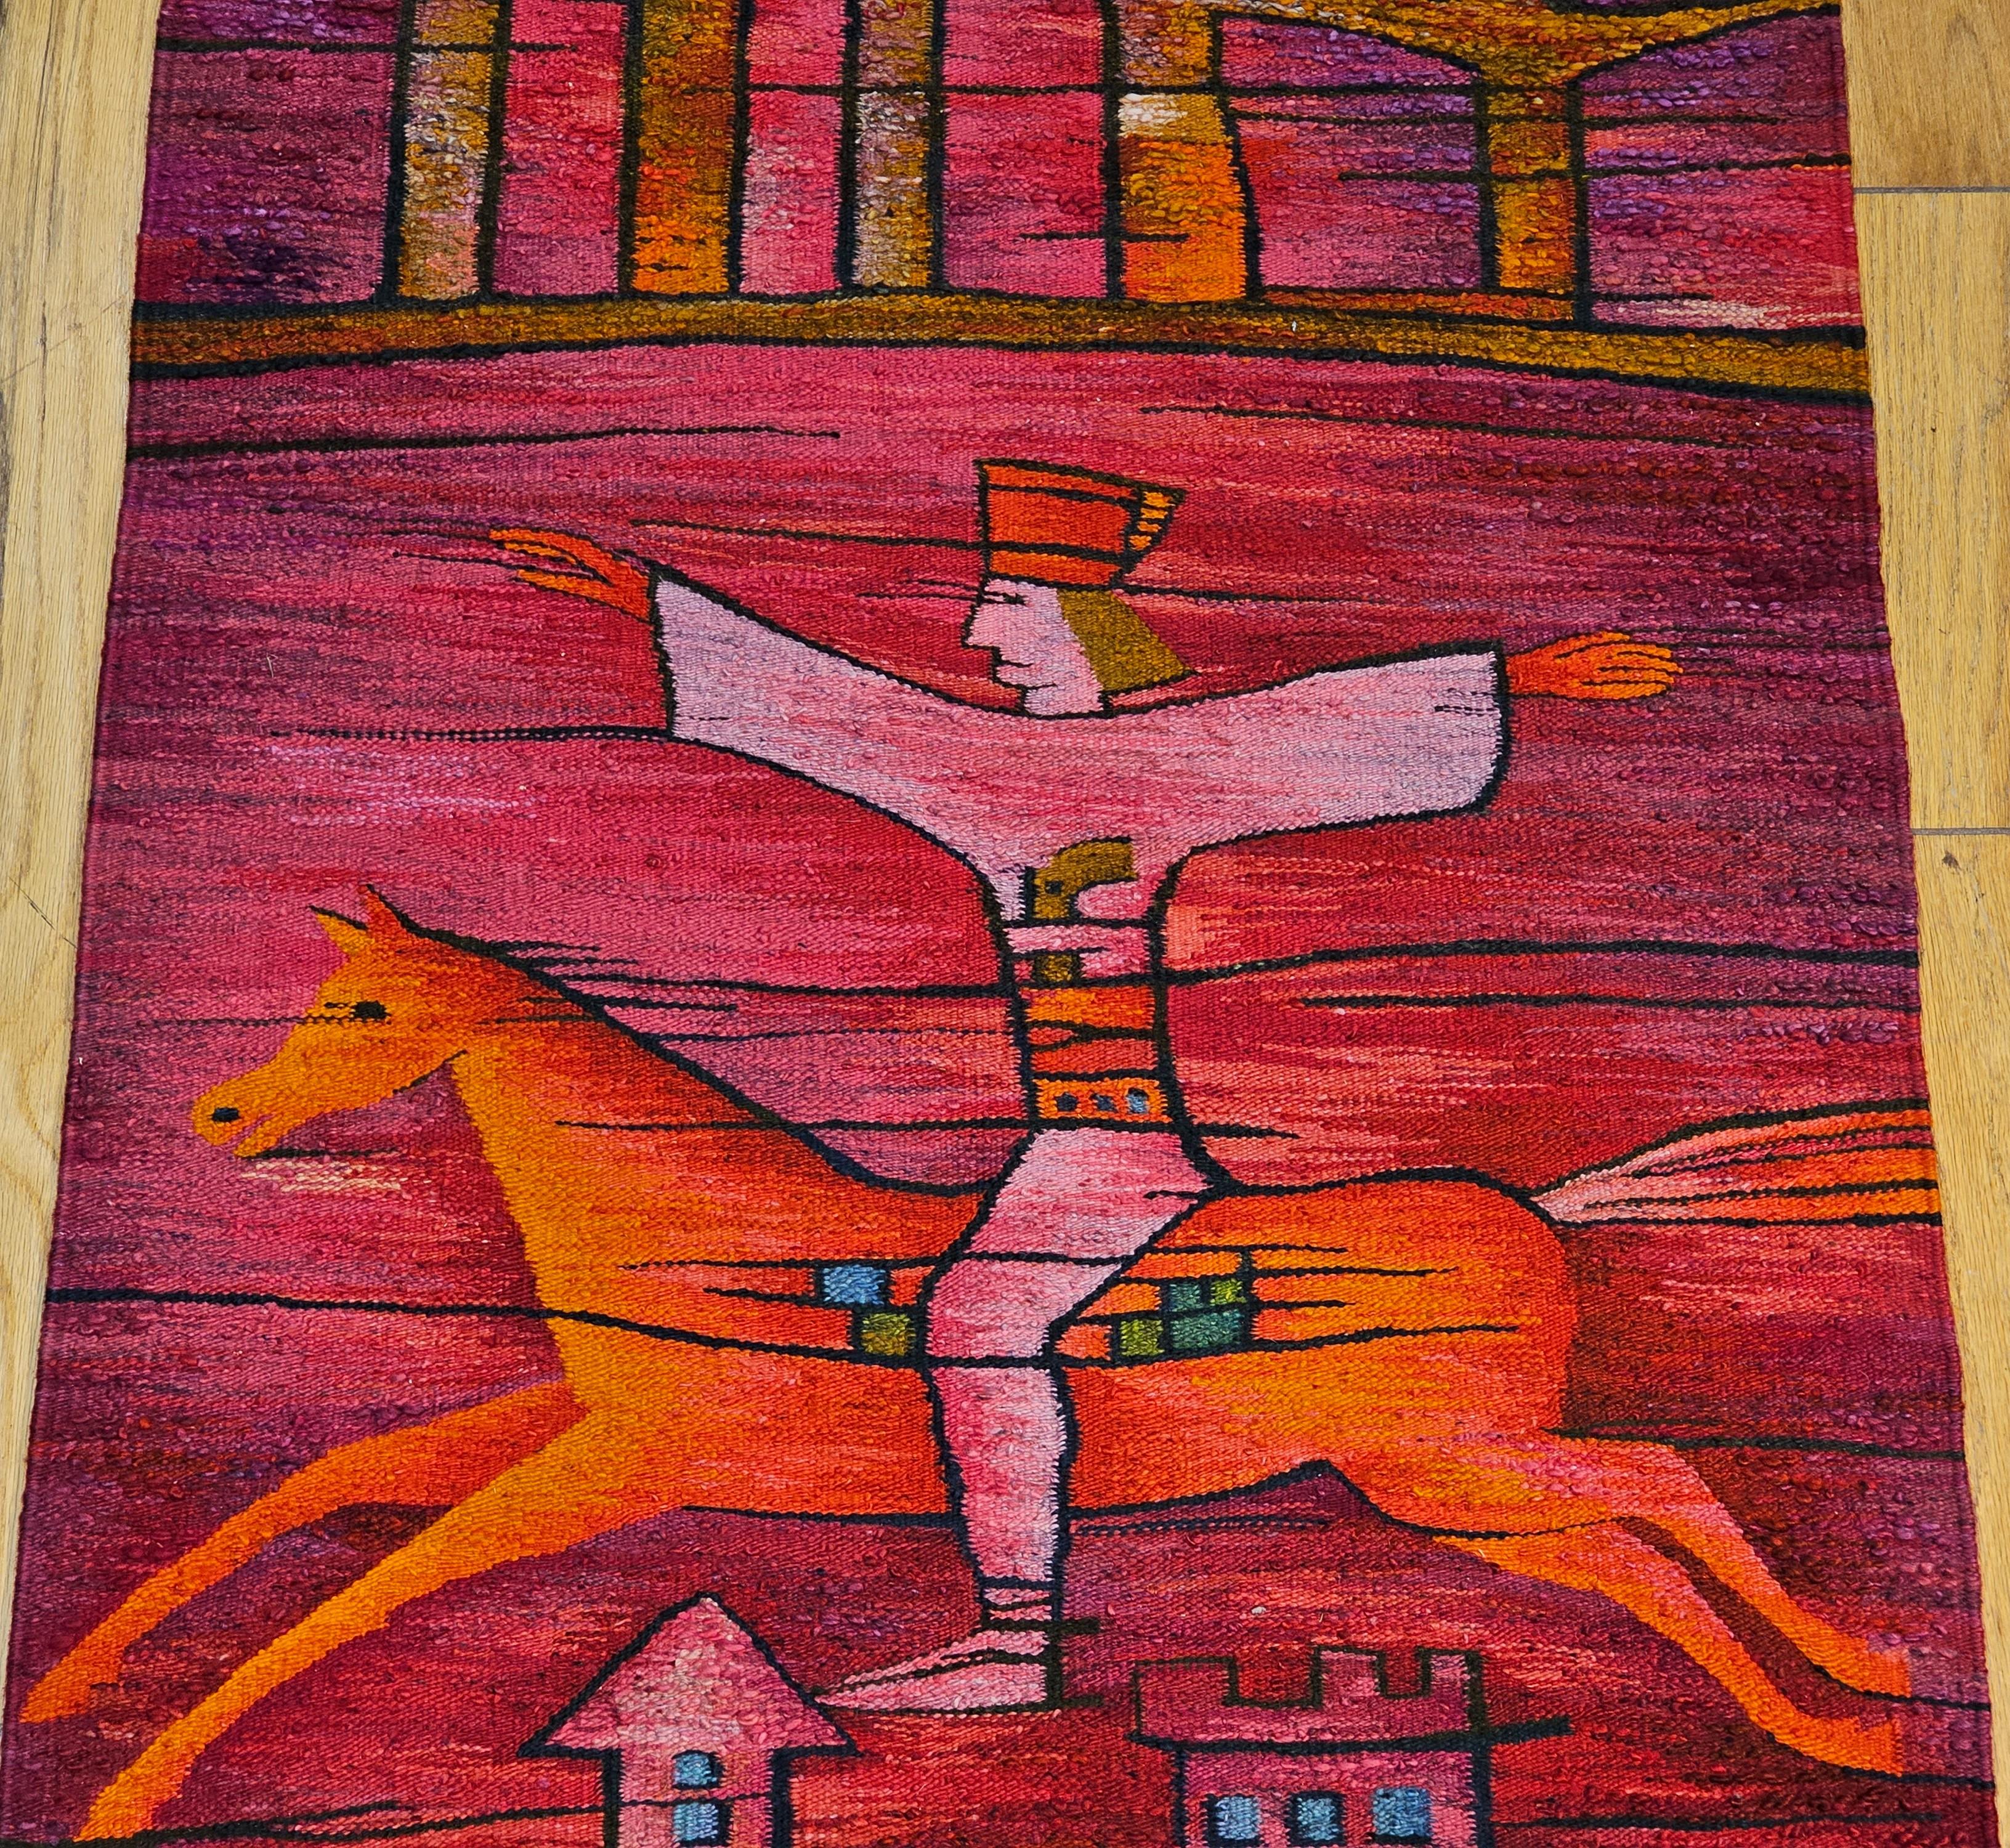 Vintage Hand-Woven Folkloric Tapestry of a Horse Rider in Lavender, Blue, Red For Sale 2